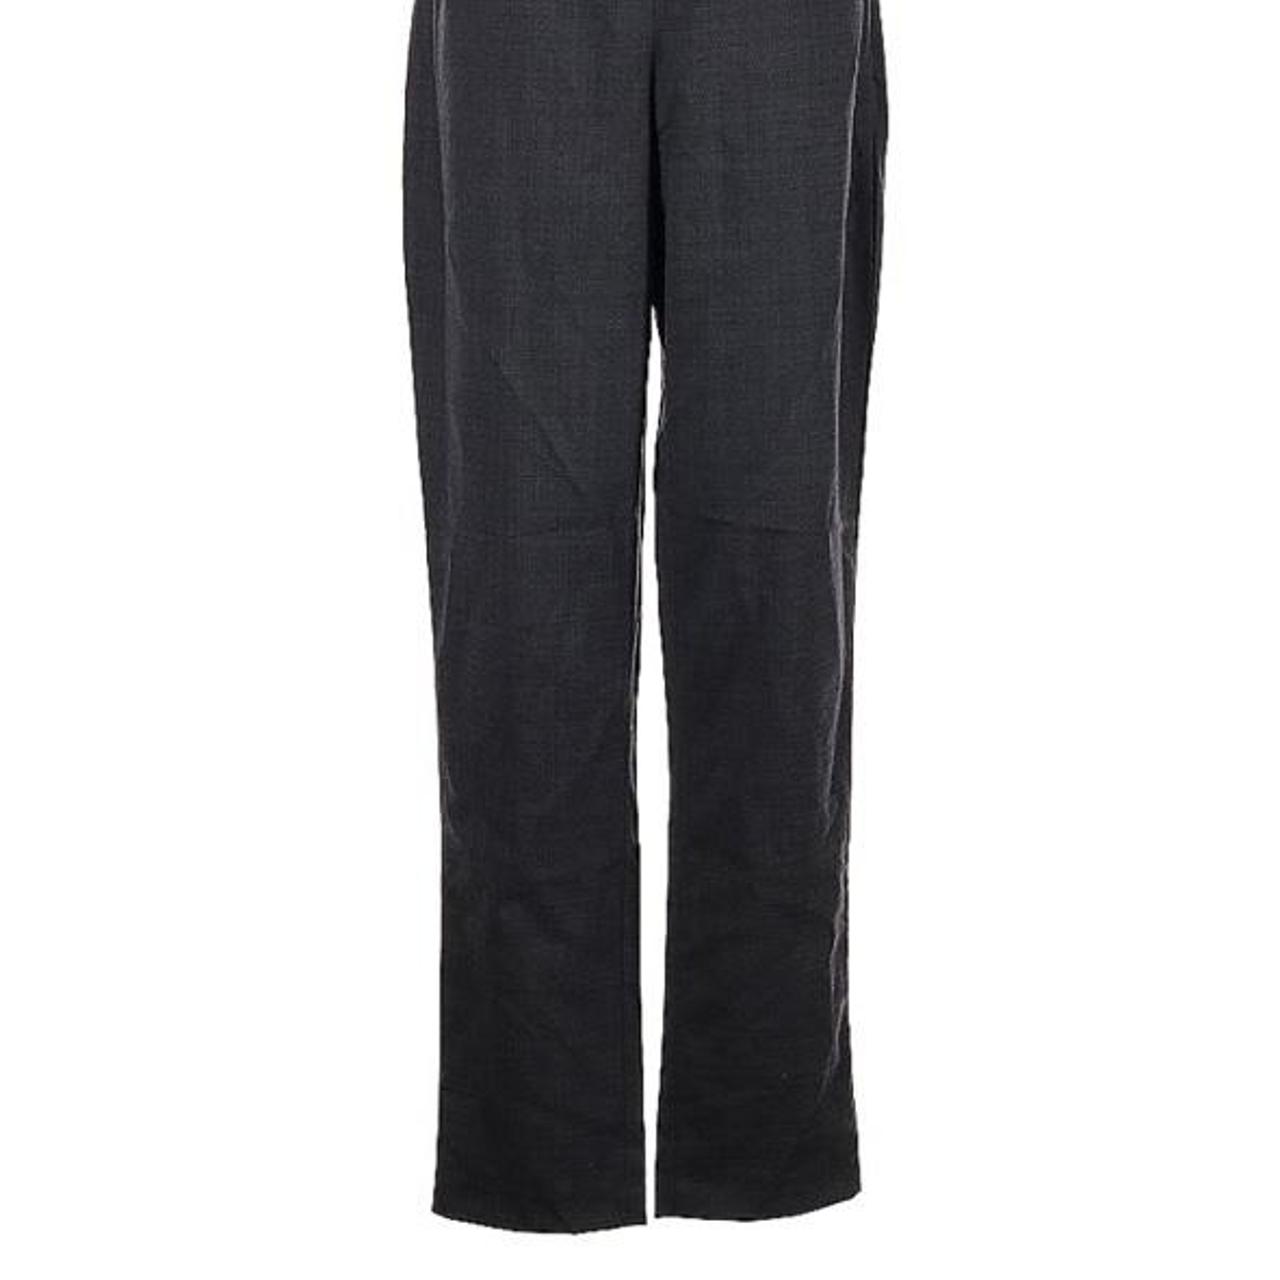 Barney's Women's Grey and Black Trousers (3)